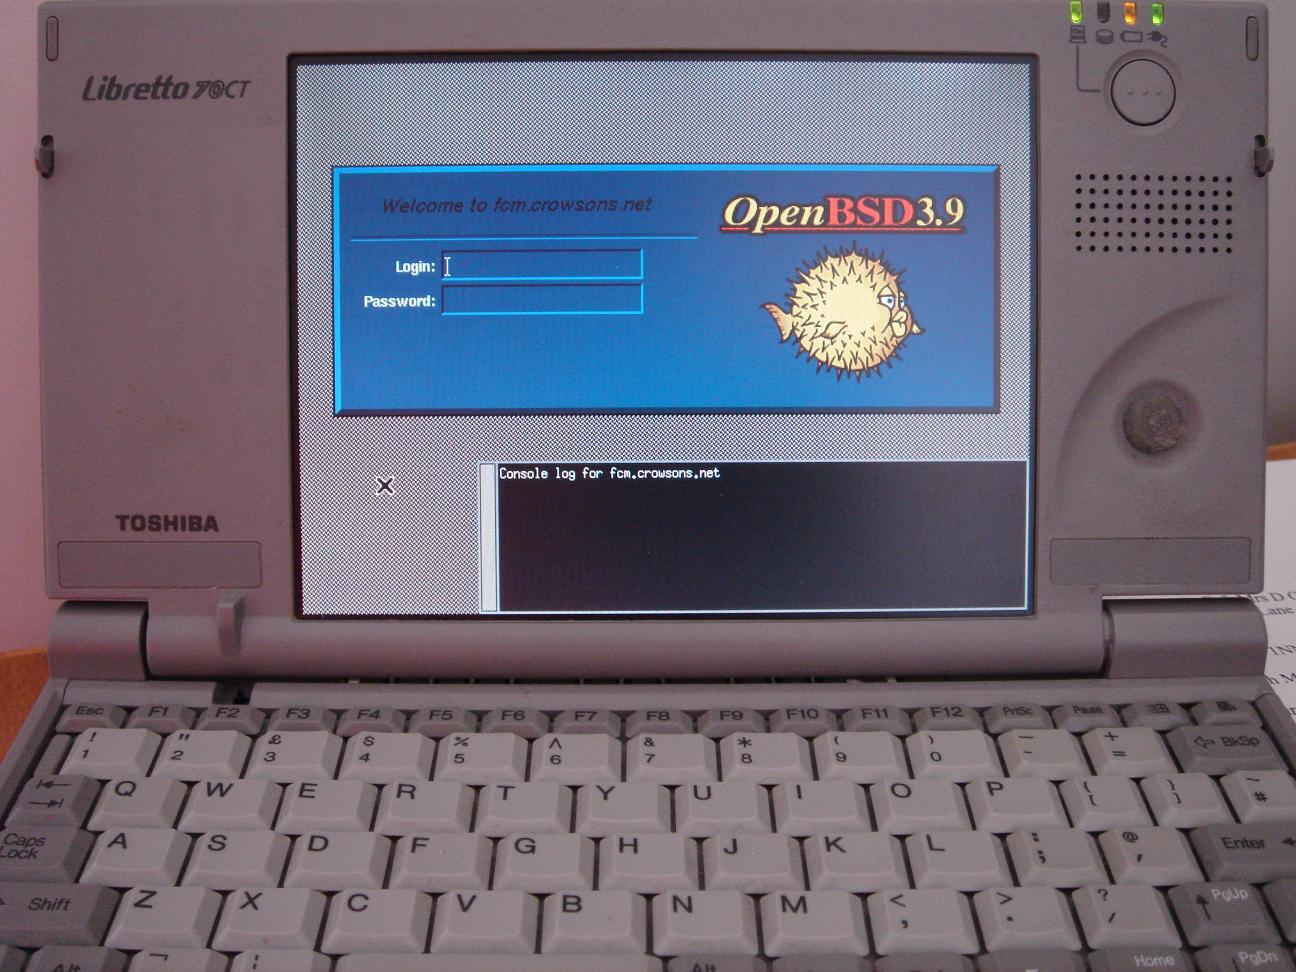 OpenBSD 3.9 on Libretto 70CT